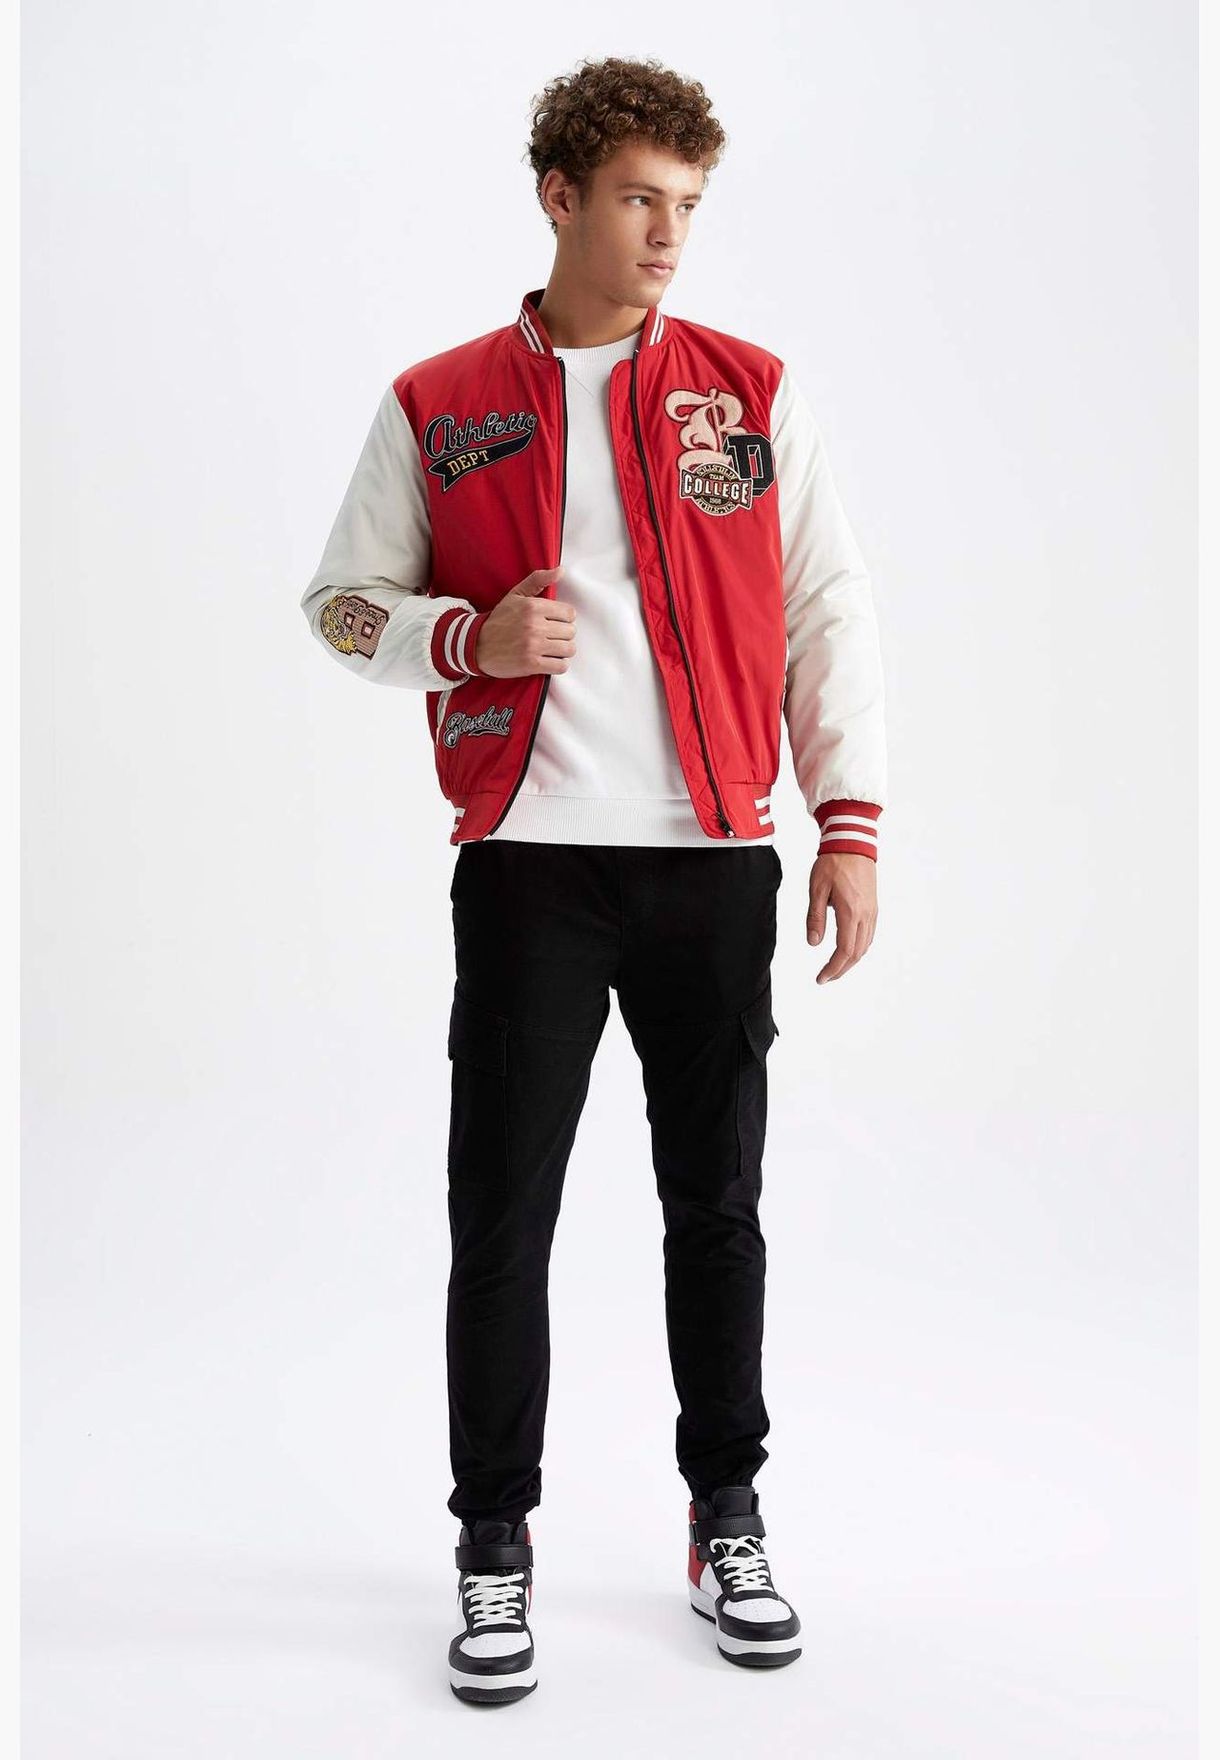 Man Oversize Fit College Neck Outer Wear Jacket